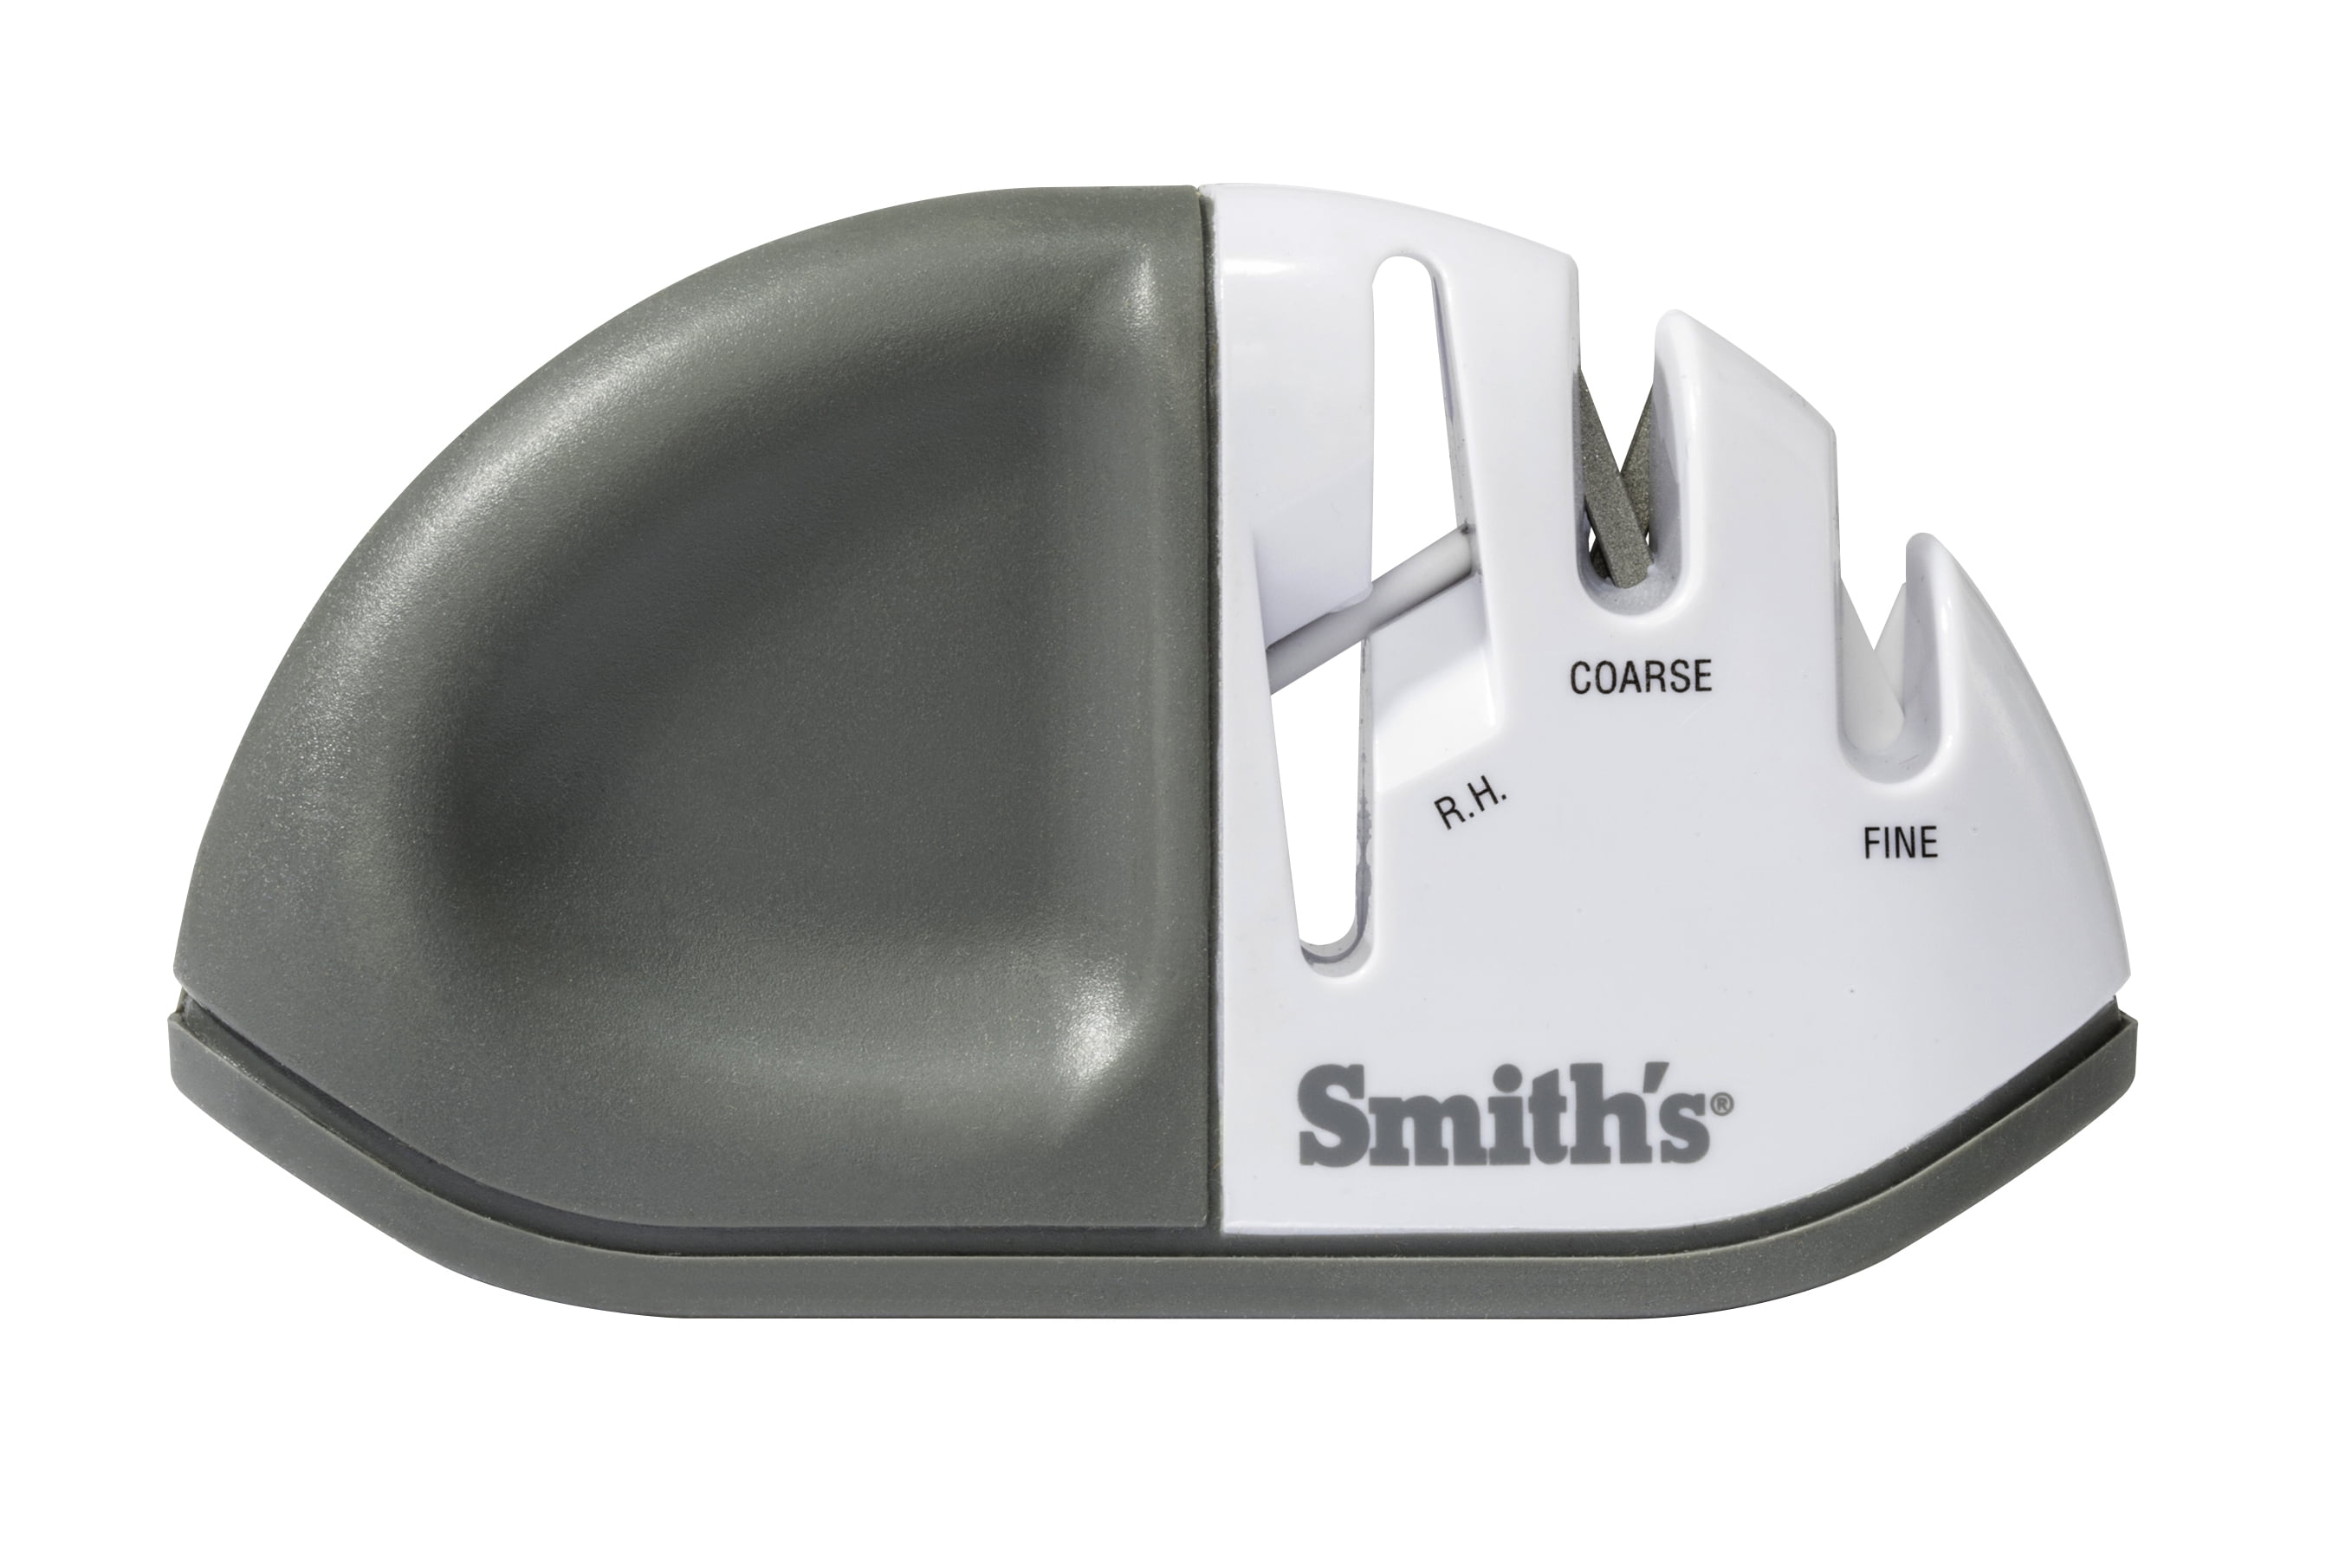 Smith's Consumer Products